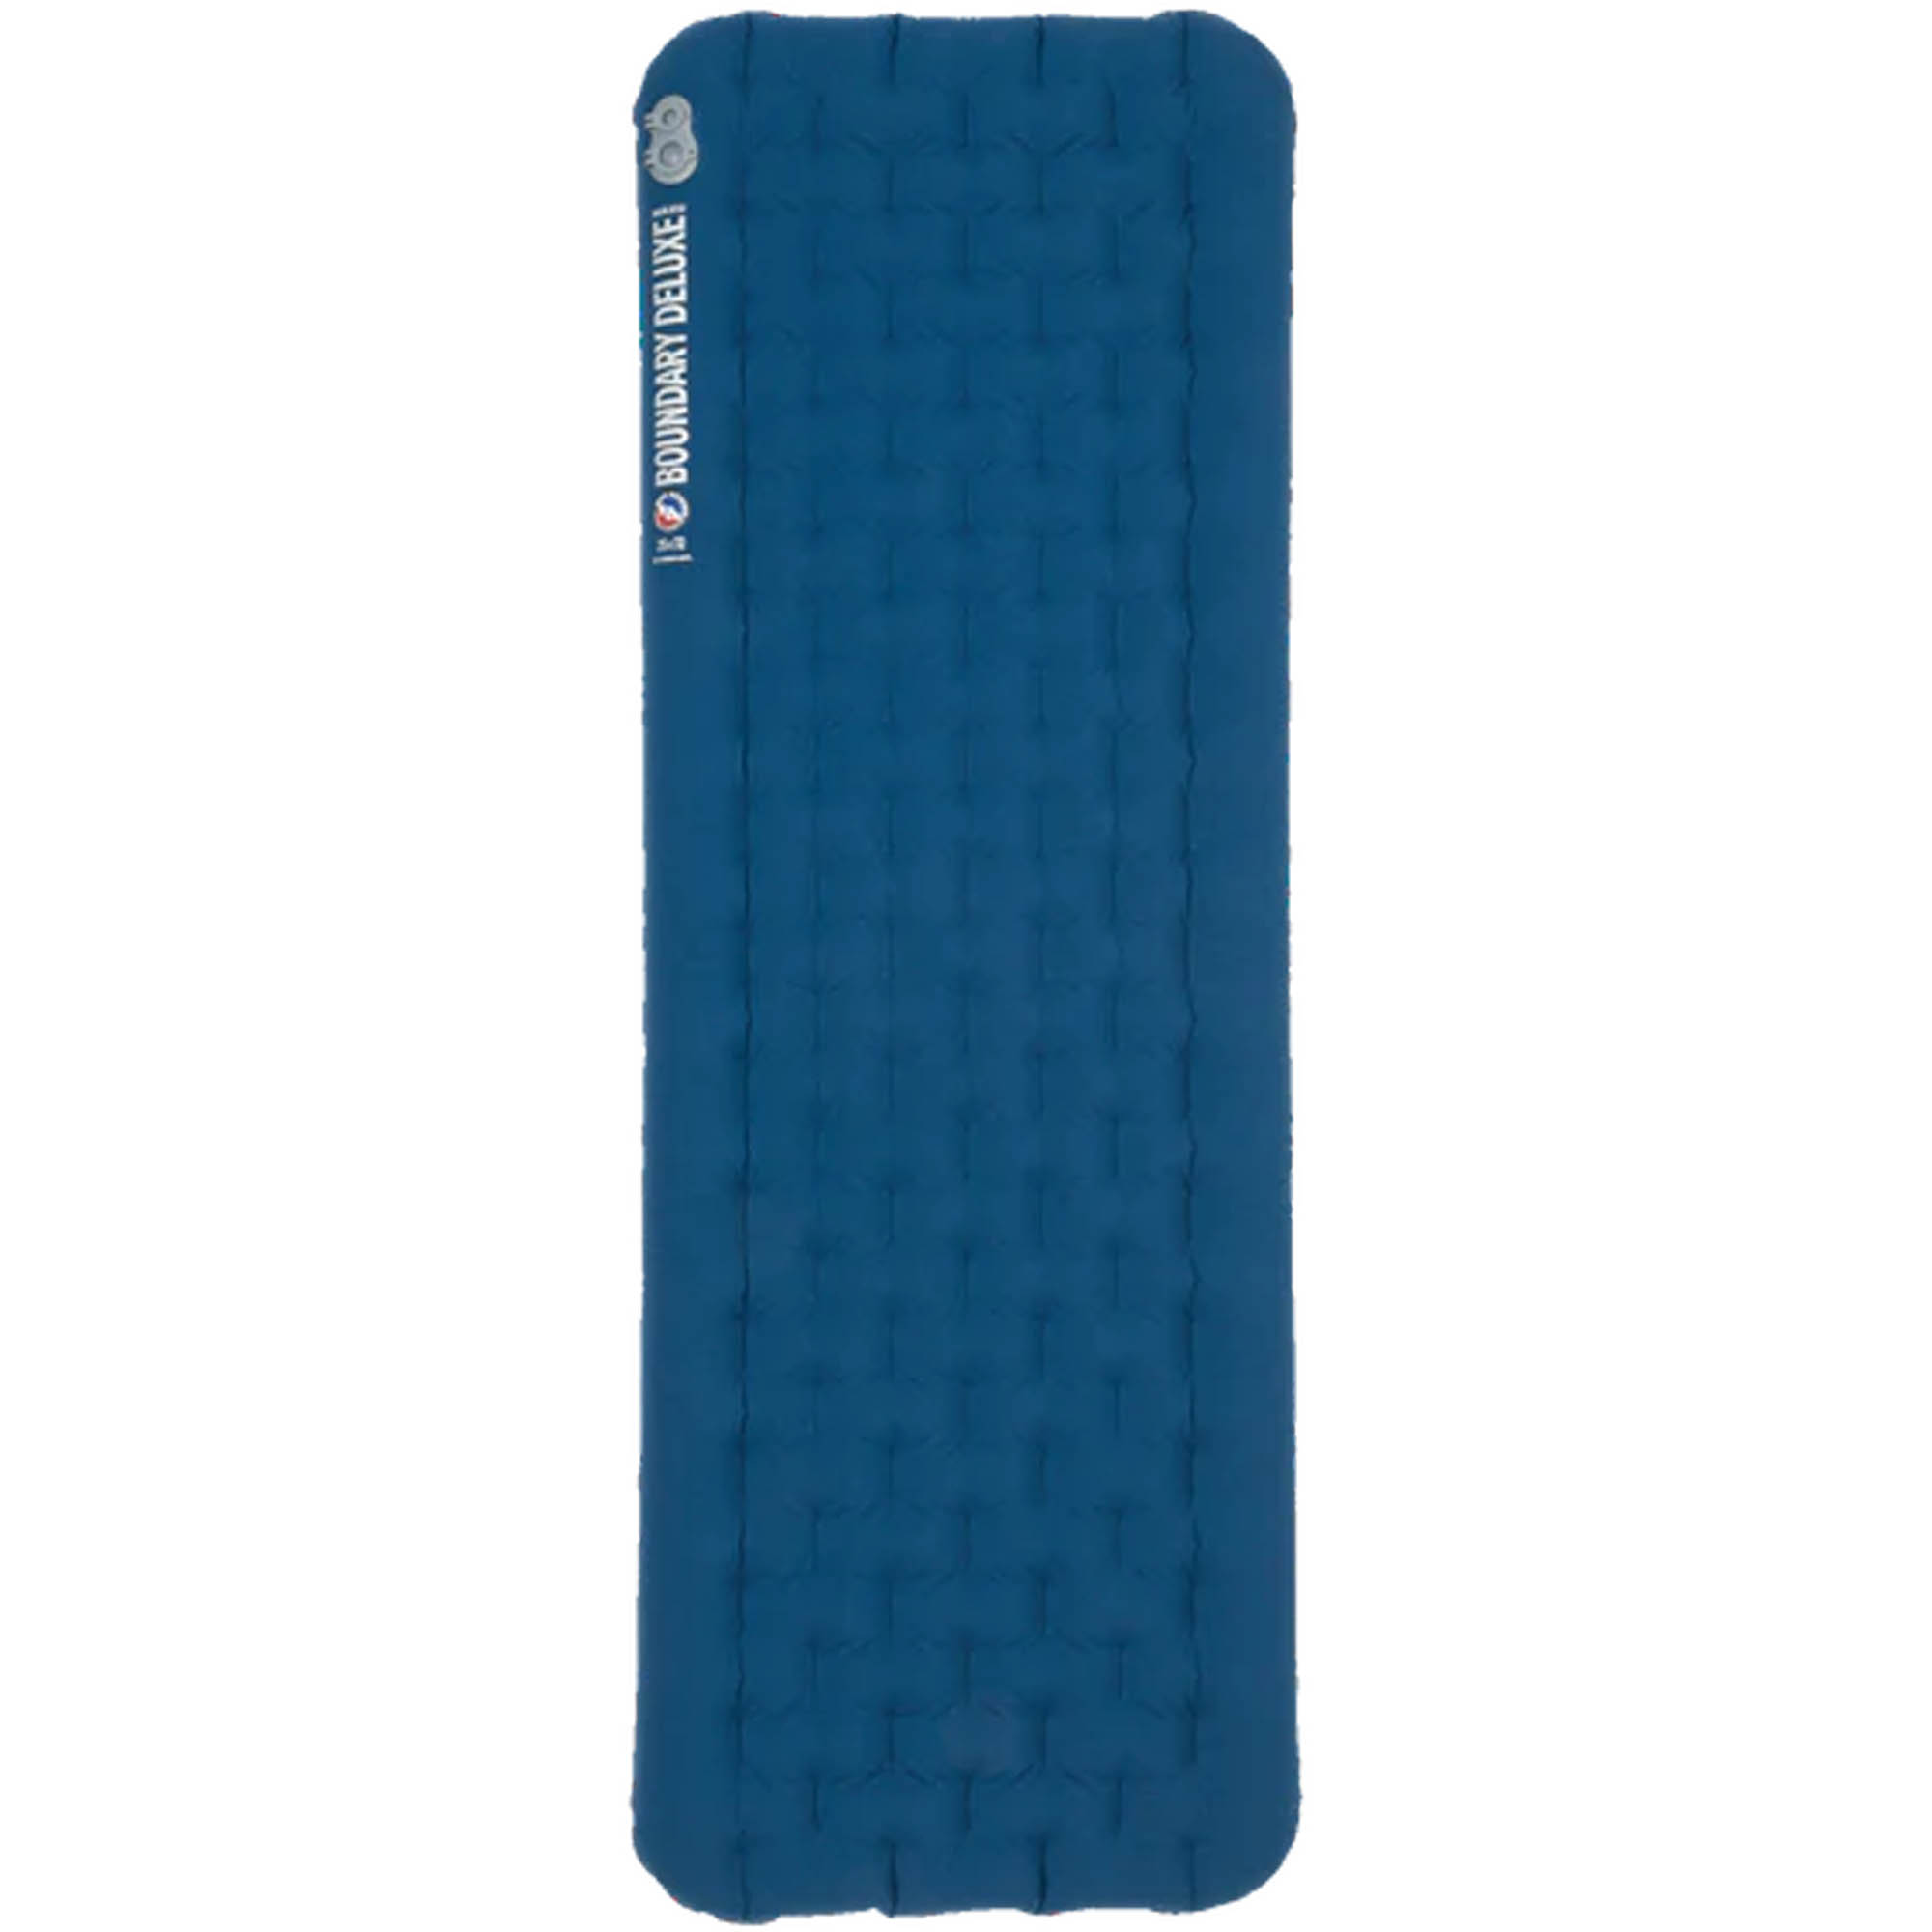 Photos - Camping Mat Big Agnes Boundary Deluxe Insulated Sleeping Pad, Blue PBDIWR23 